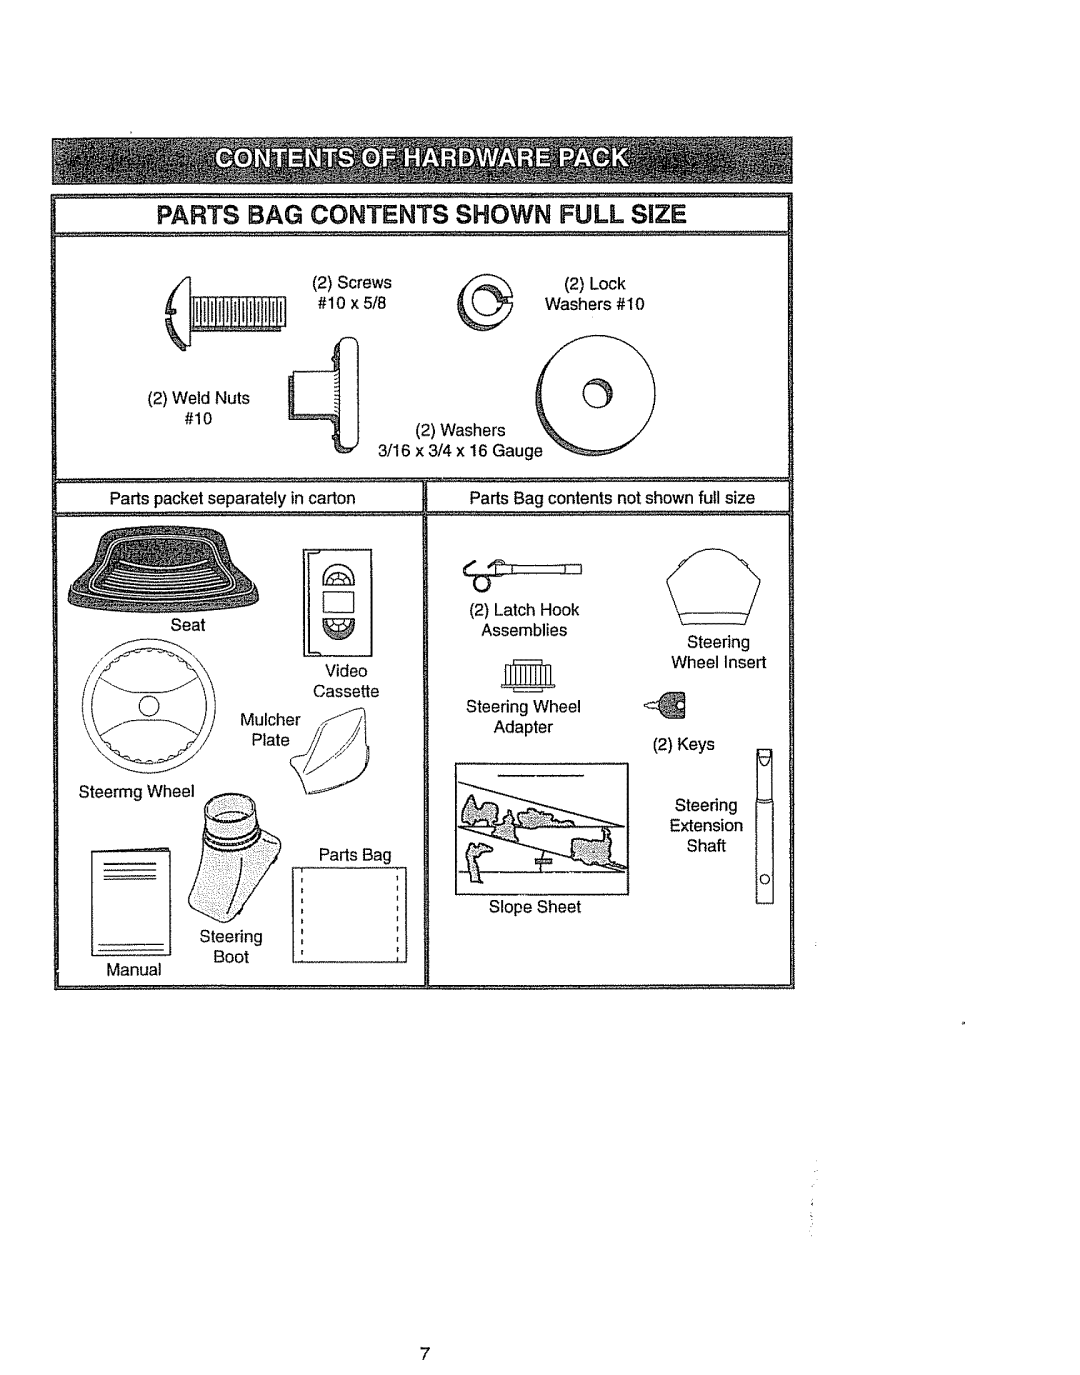 Craftsman 917270841 owner manual PARTS BAG CONTENTS SHOWN FULL SiZE, L_._ 